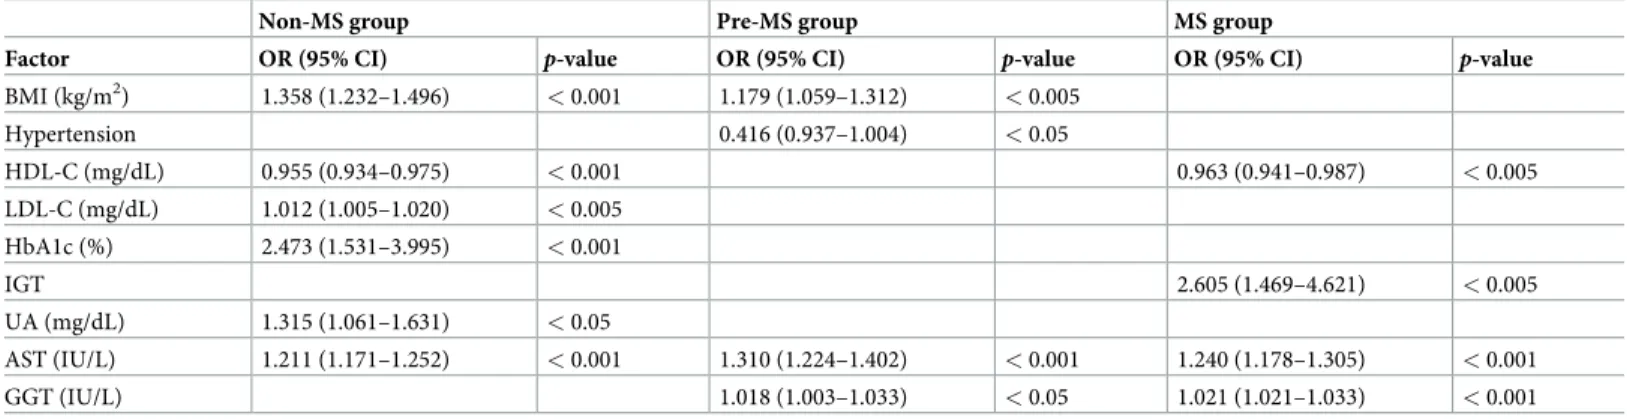 Table 3. Results of multivariate analysis for independent predictors of NAFLD having elevation of ALT among Non-MS, Pre-MS, and MS groups.